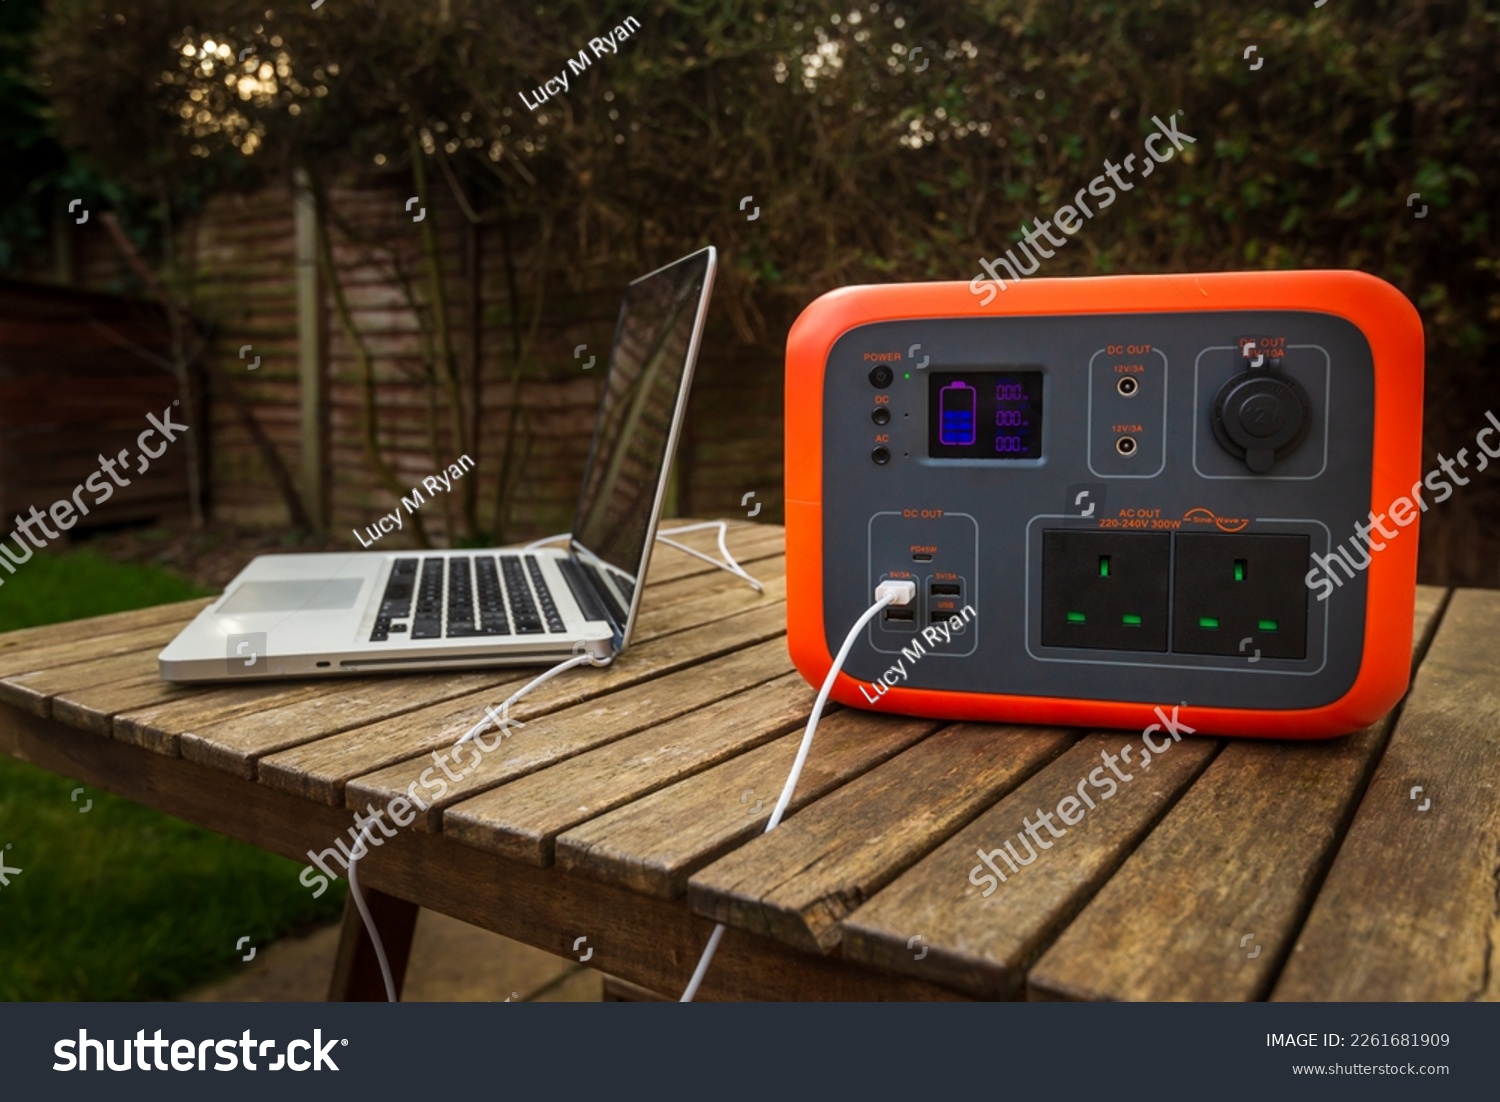 Portable power station solar electricity generator outdoors with laptop plugged in charging. Wireless charging lithium battery backup for power outage emergencies outdoors, camping or travel. #2261681909